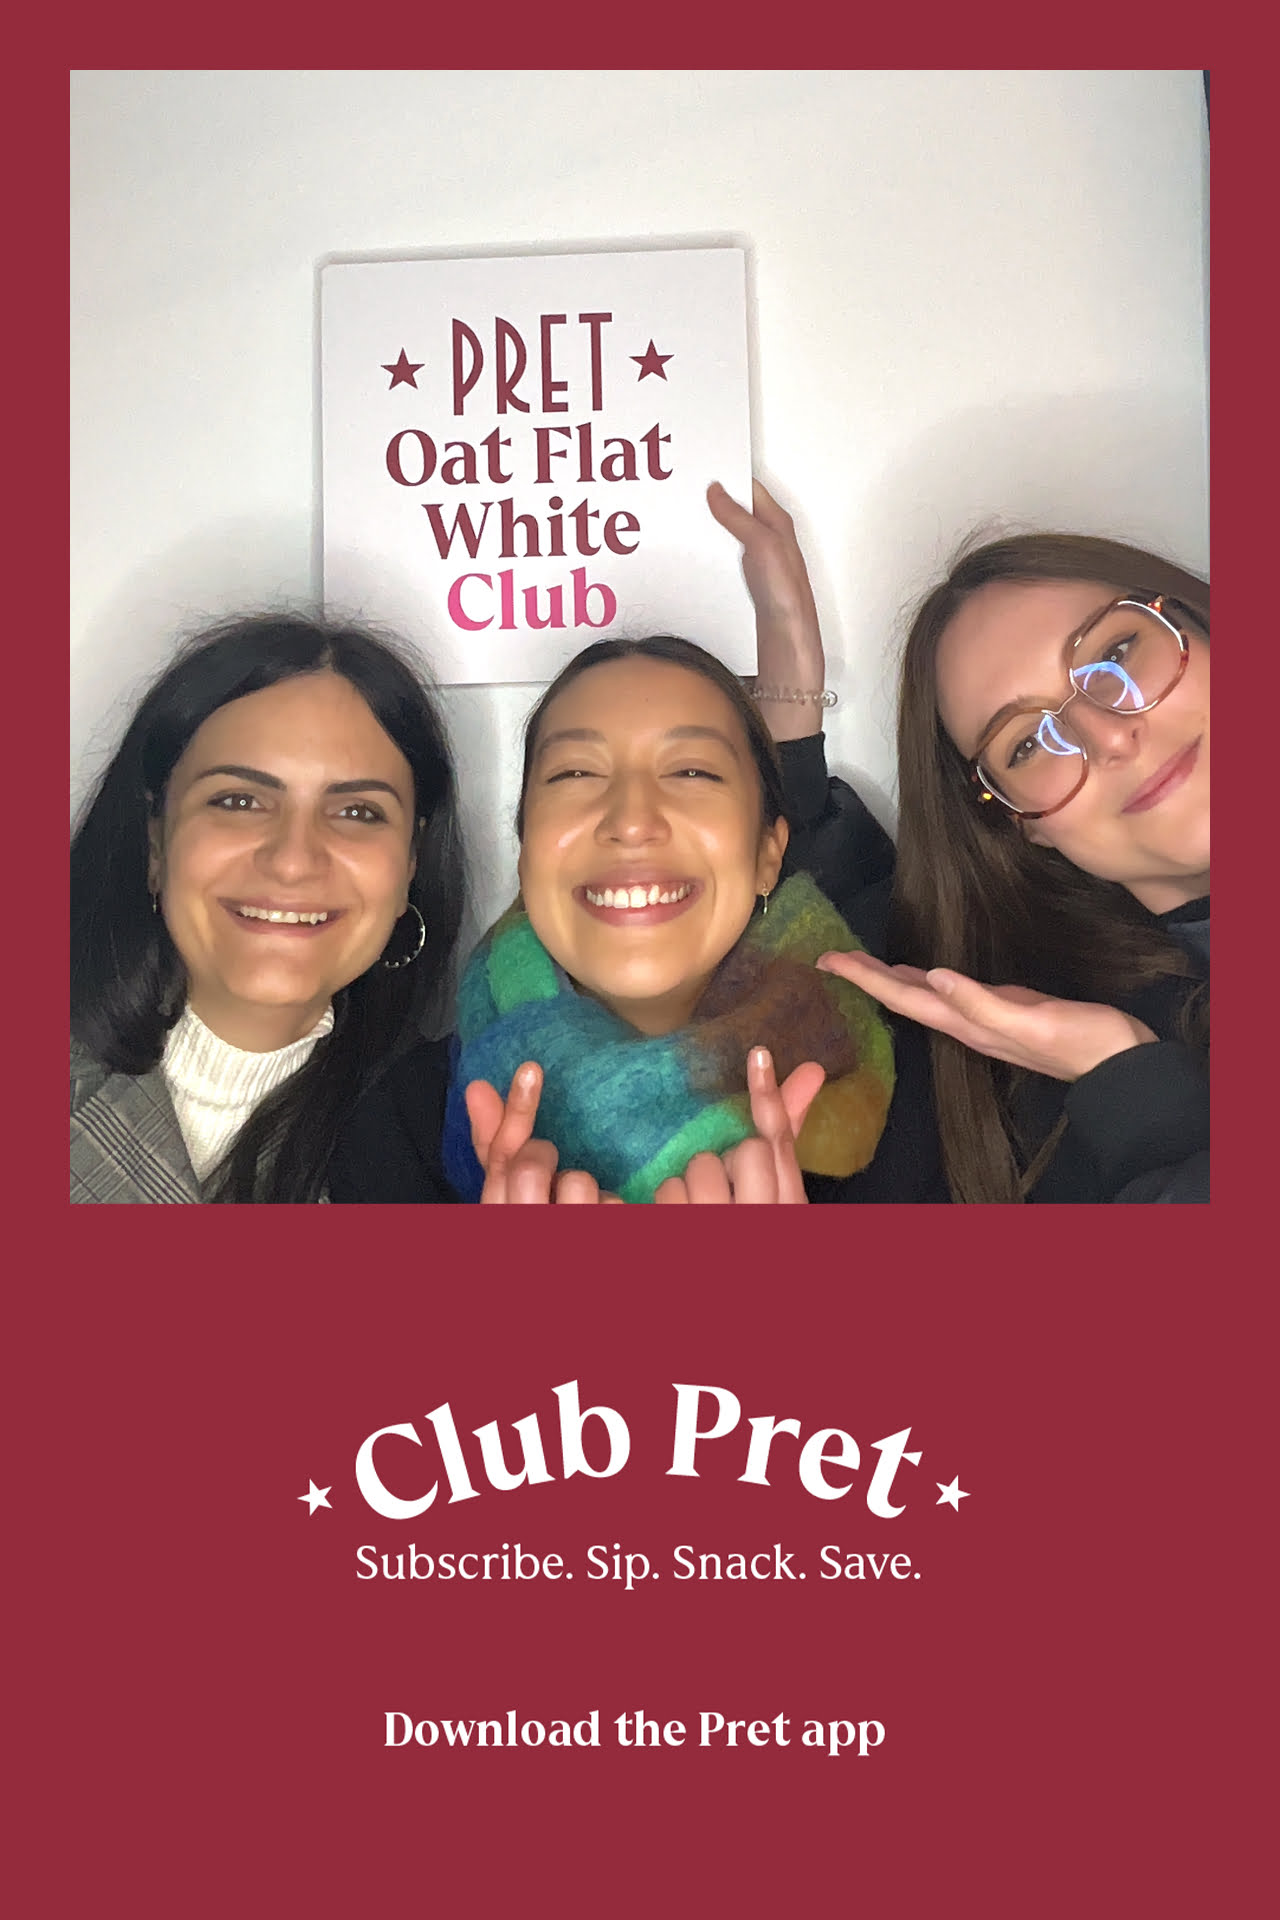 Club Pret Photo Experience, classic booth